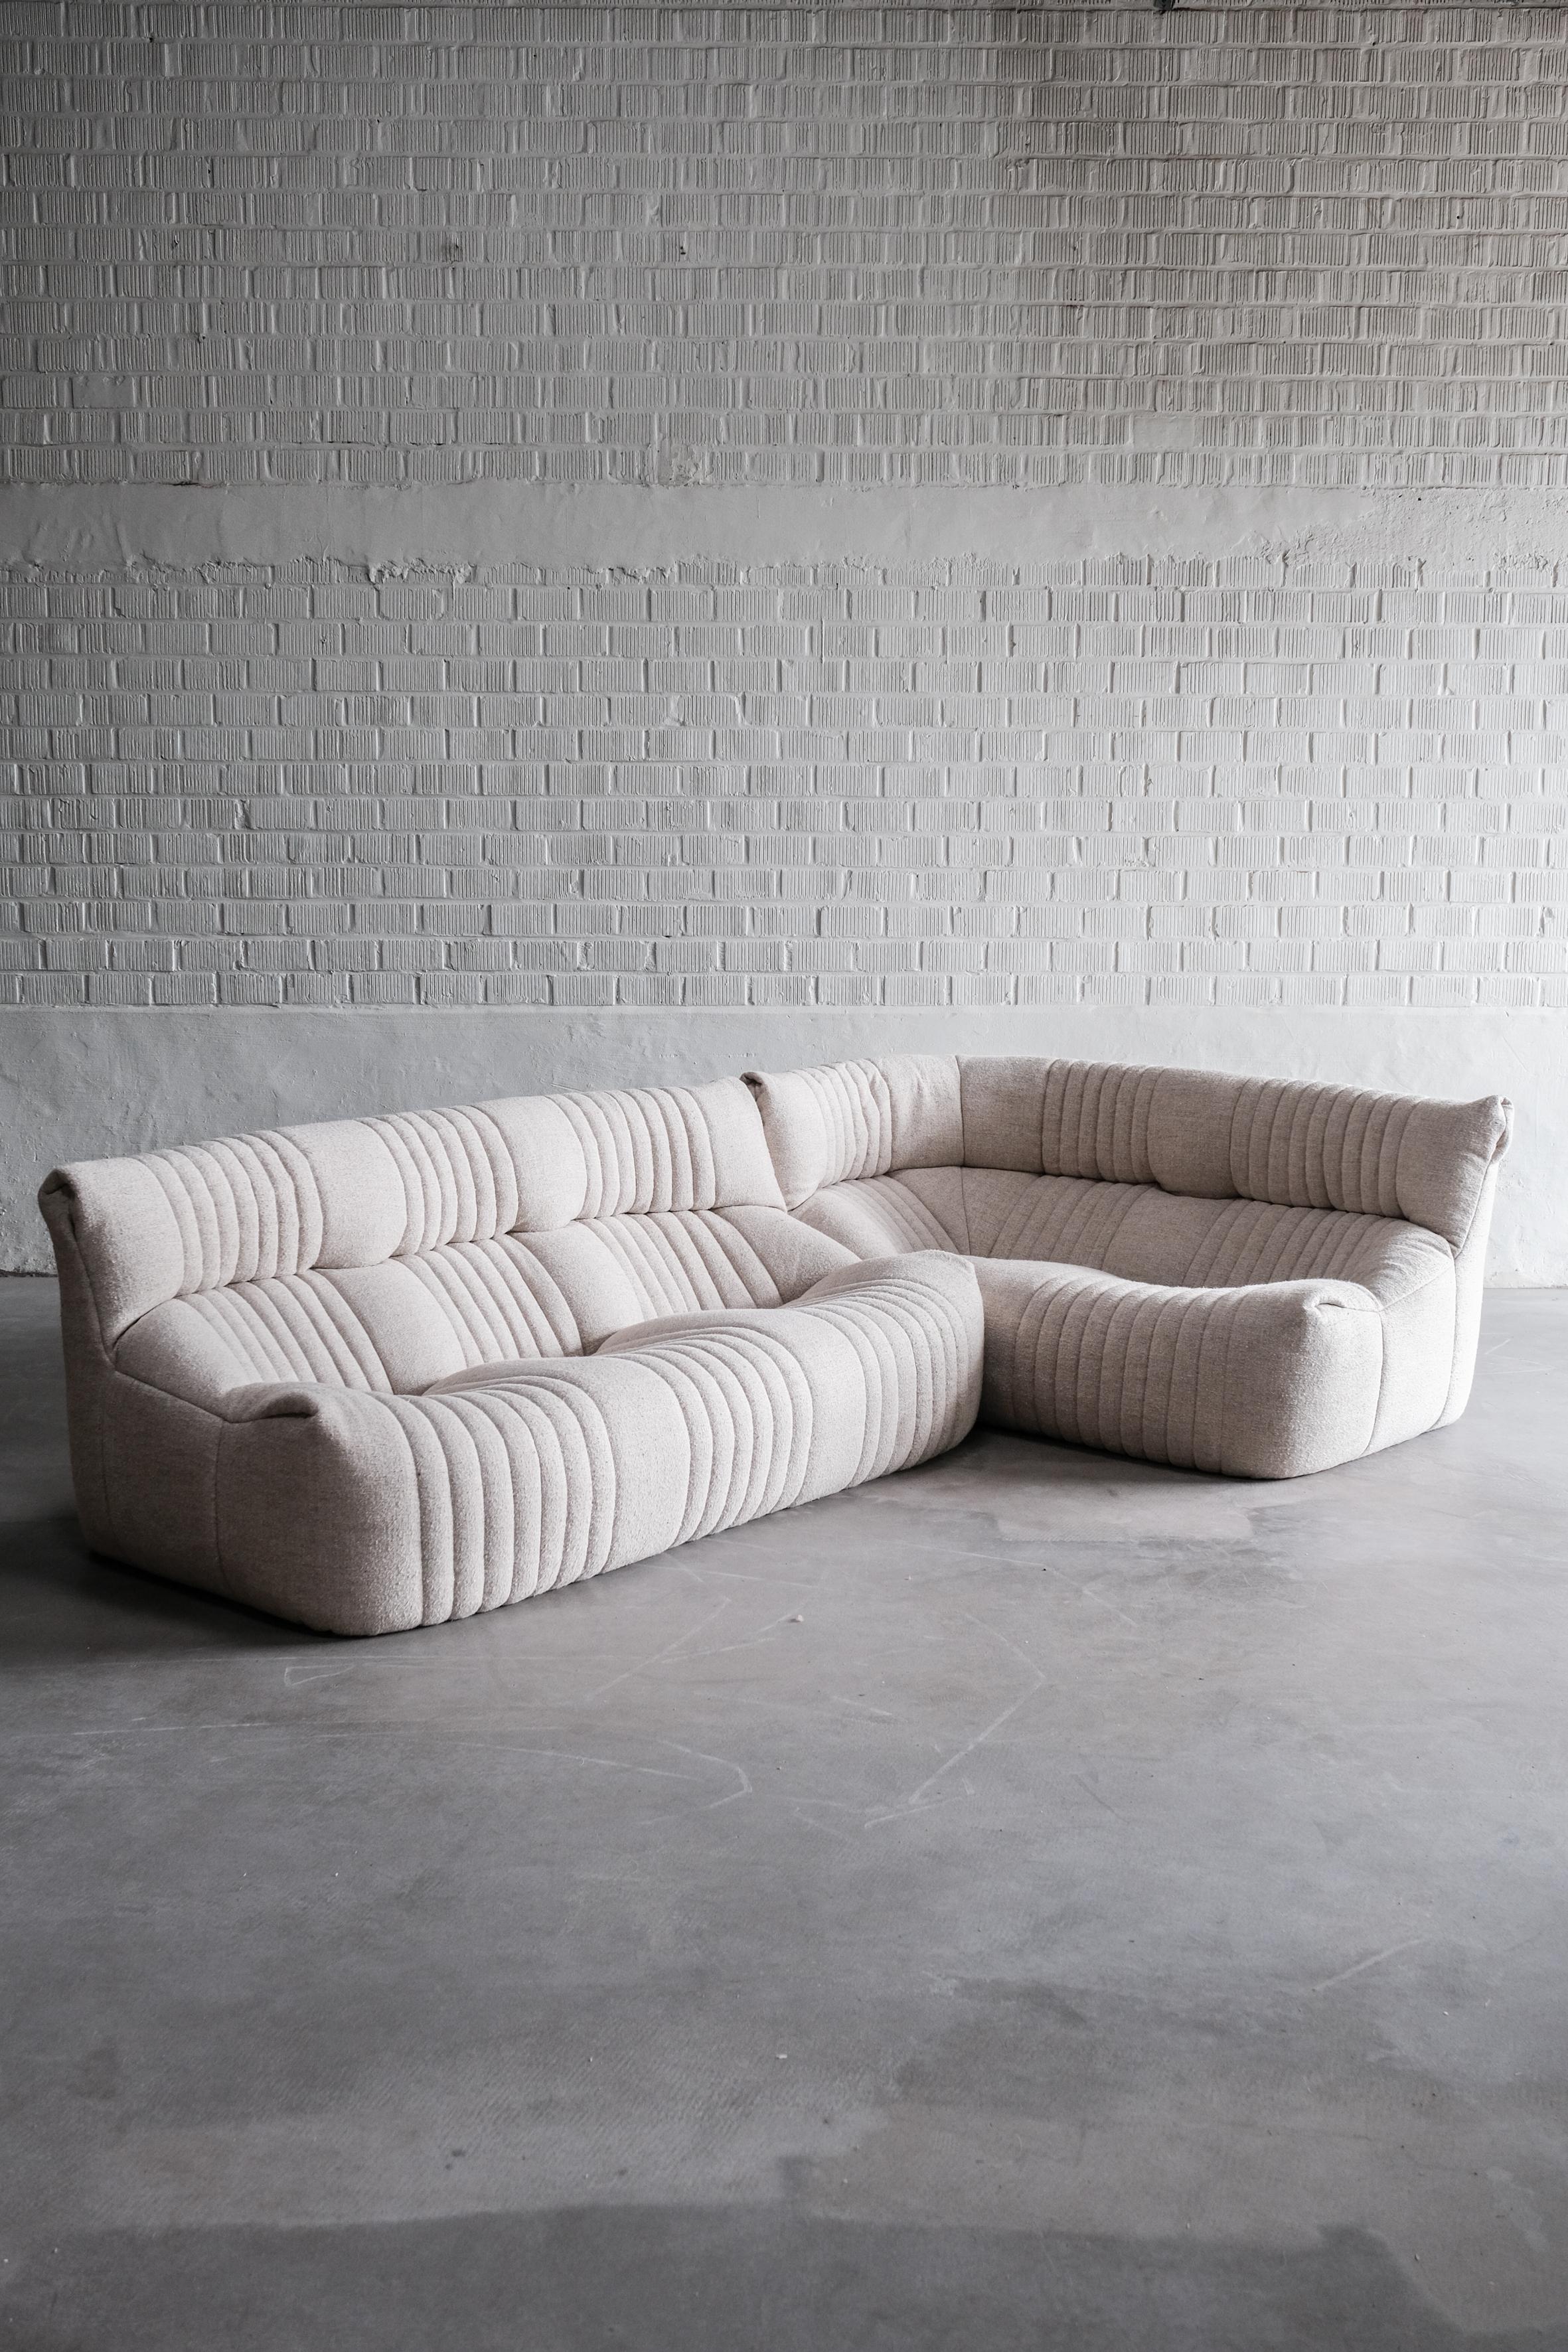 French Aralia seating group by Michel Ducaroy for Ligne Roset